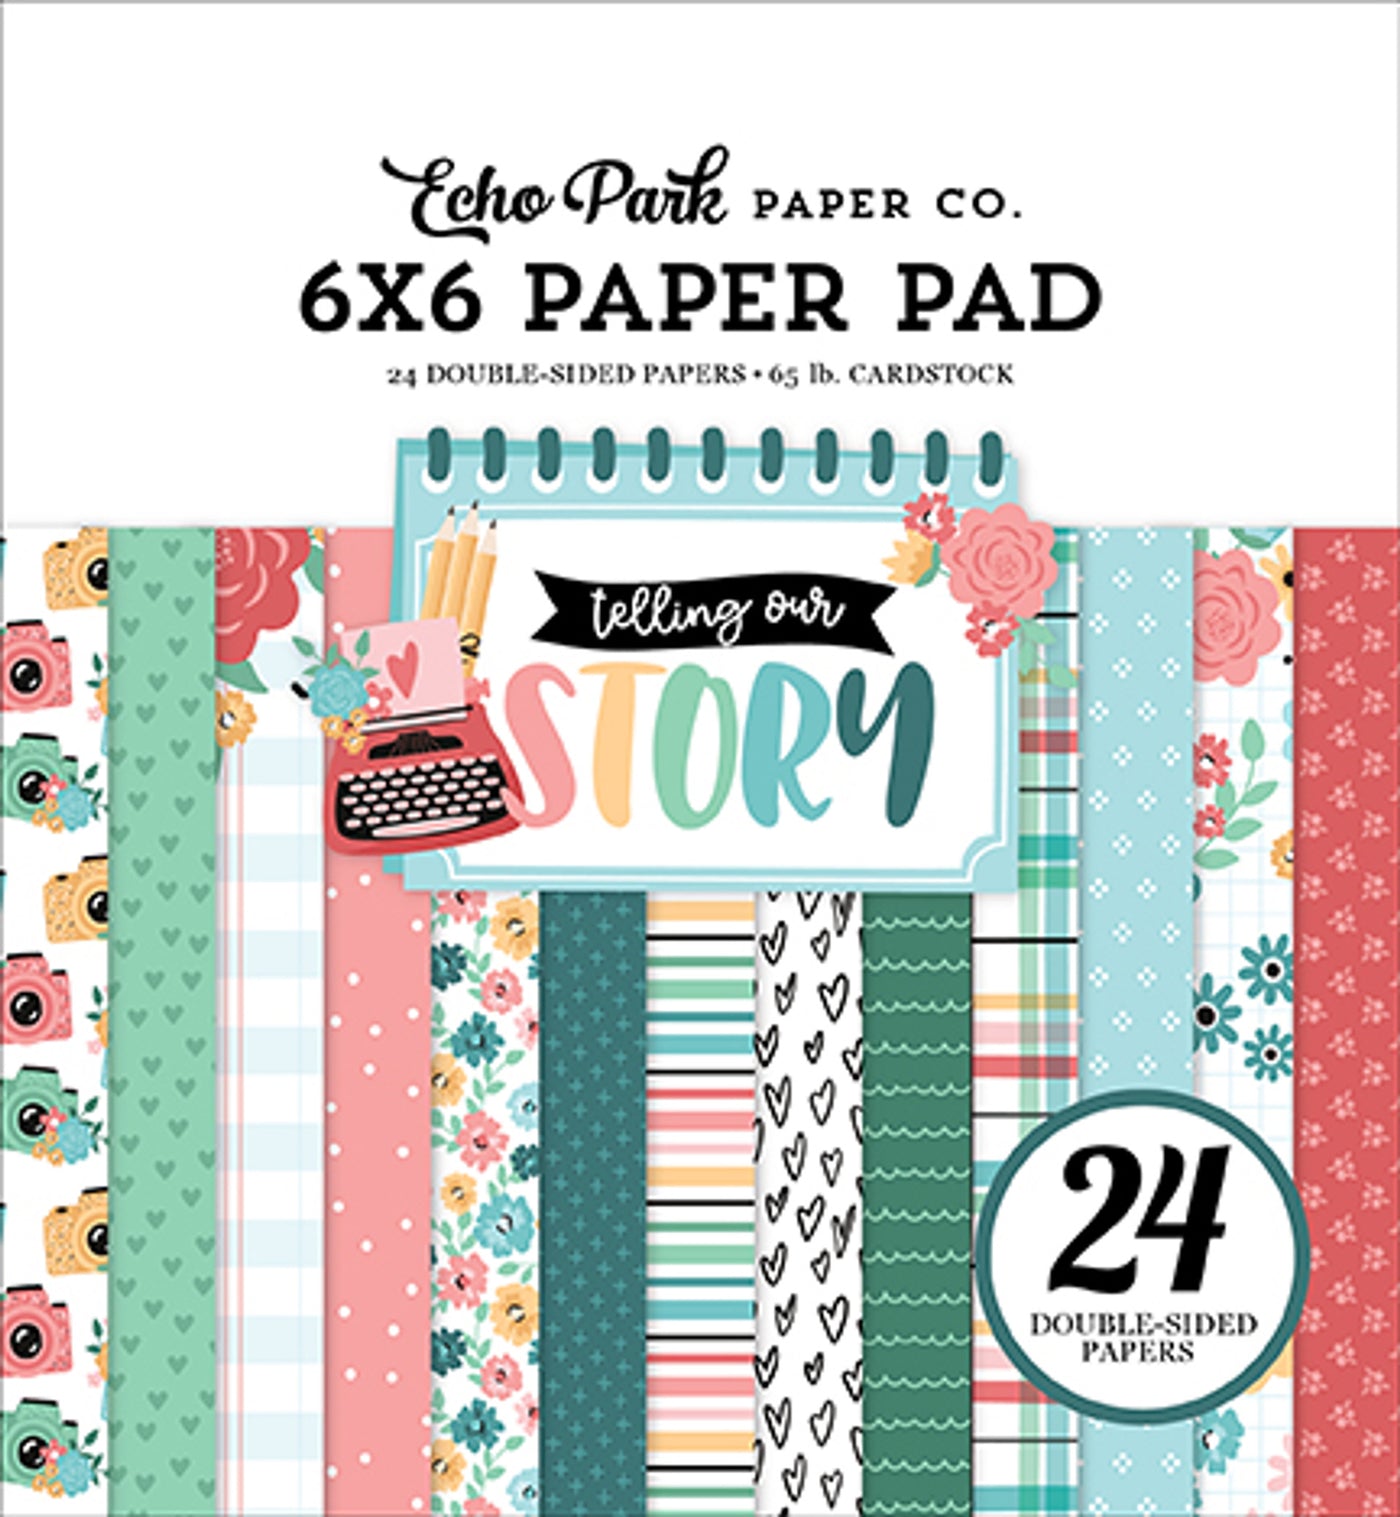 The 6x6 pad features cute designs and colors to celebrate your story! Fun for cards and papercrafts. Includes 24 double-sided pages.